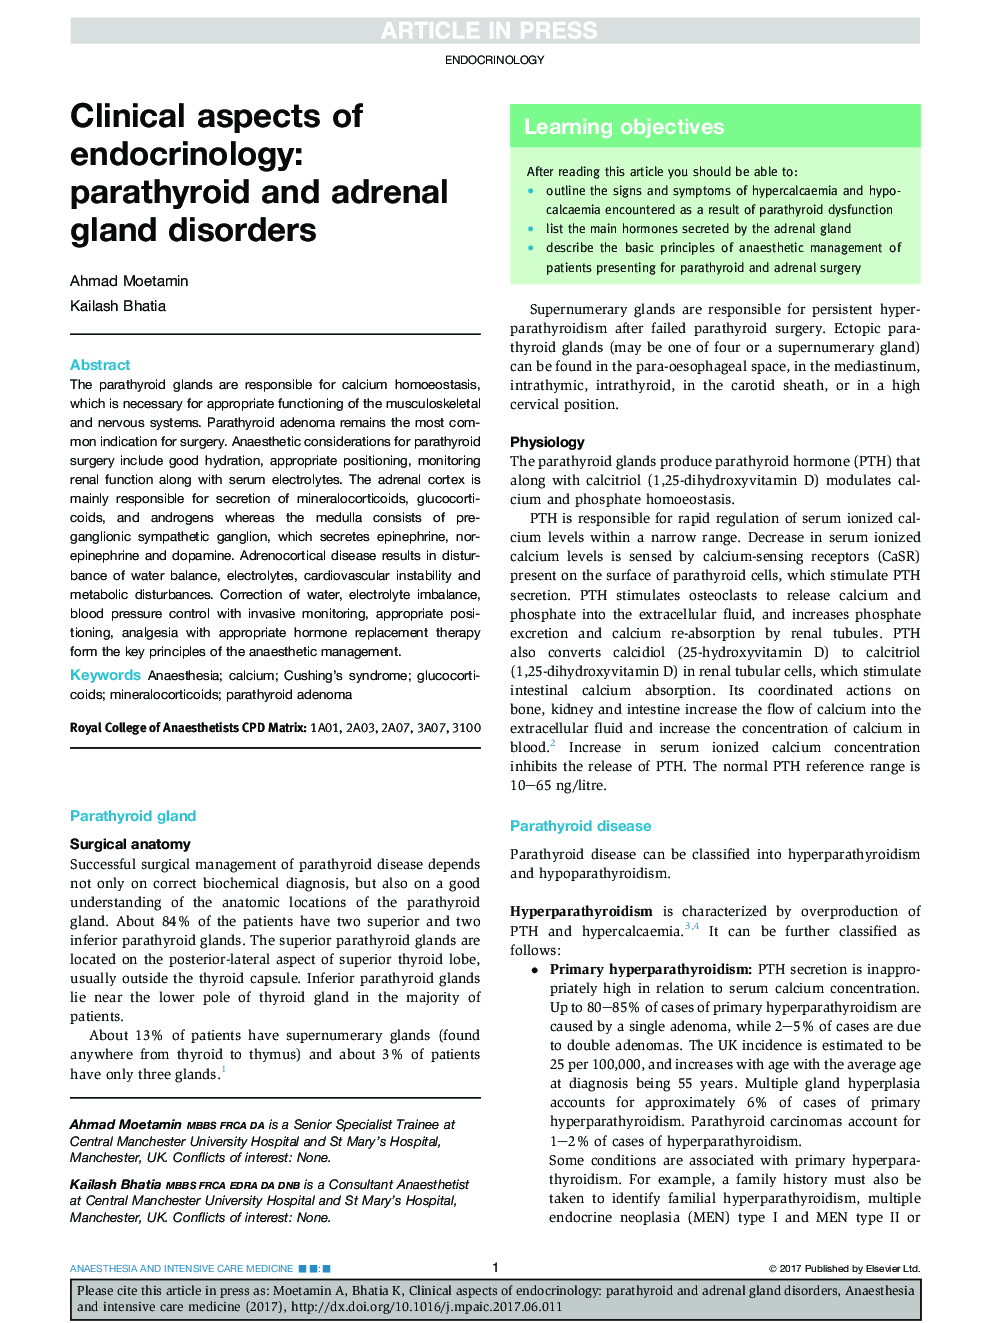 Clinical aspects of endocrinology: parathyroid and adrenal gland disorders